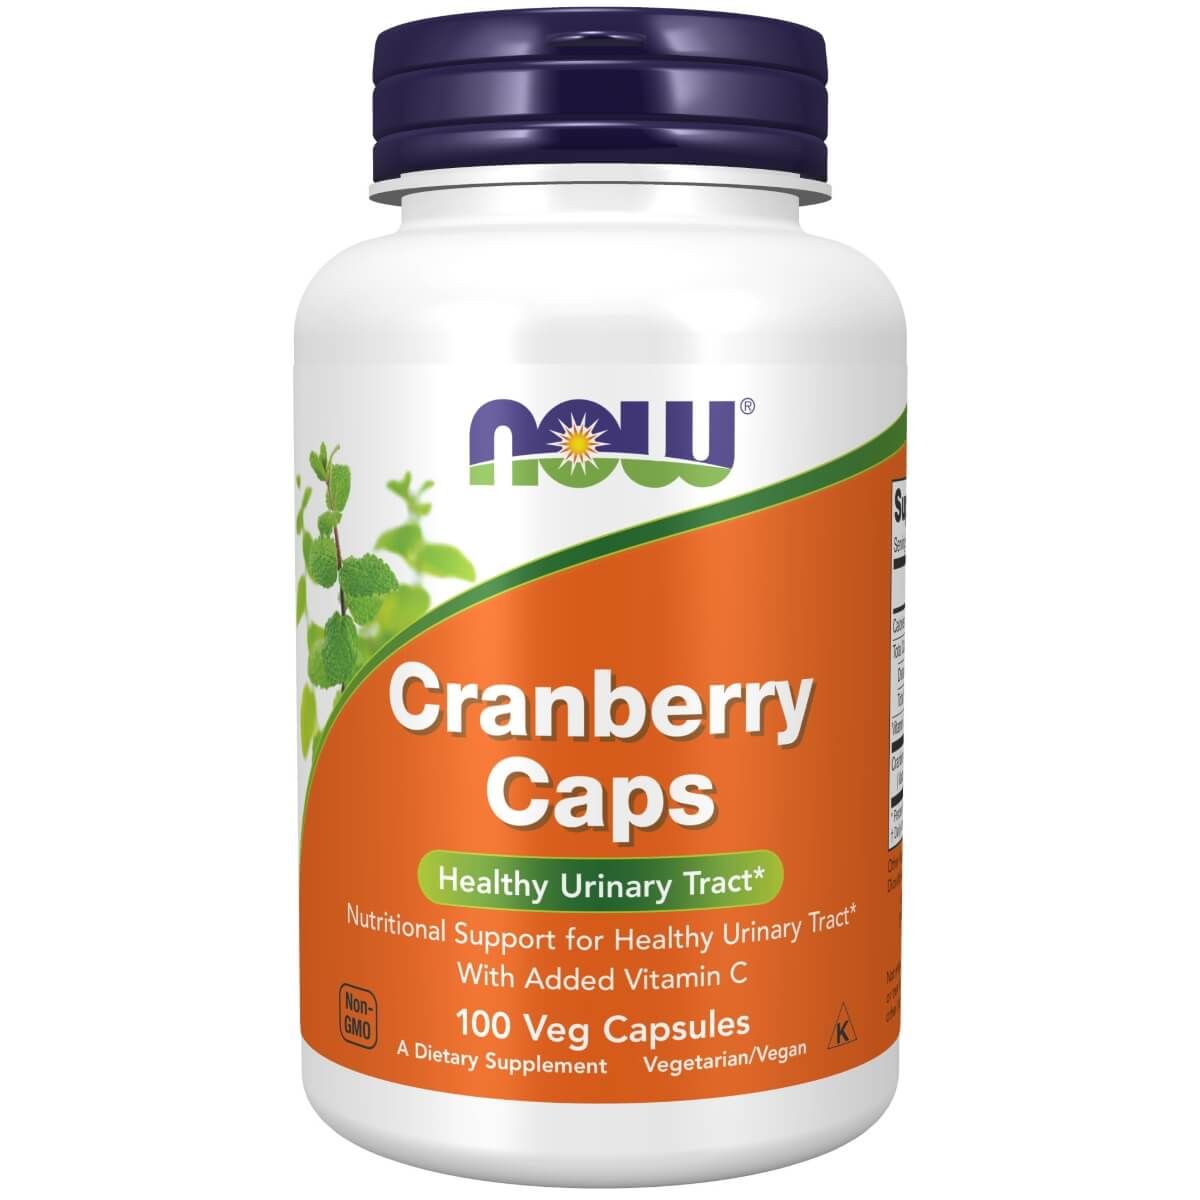 Photos - Vitamins & Minerals Now Foods Cranberry Caps with Added Vitamin C 100 Veg Capsules PBW-P8249 